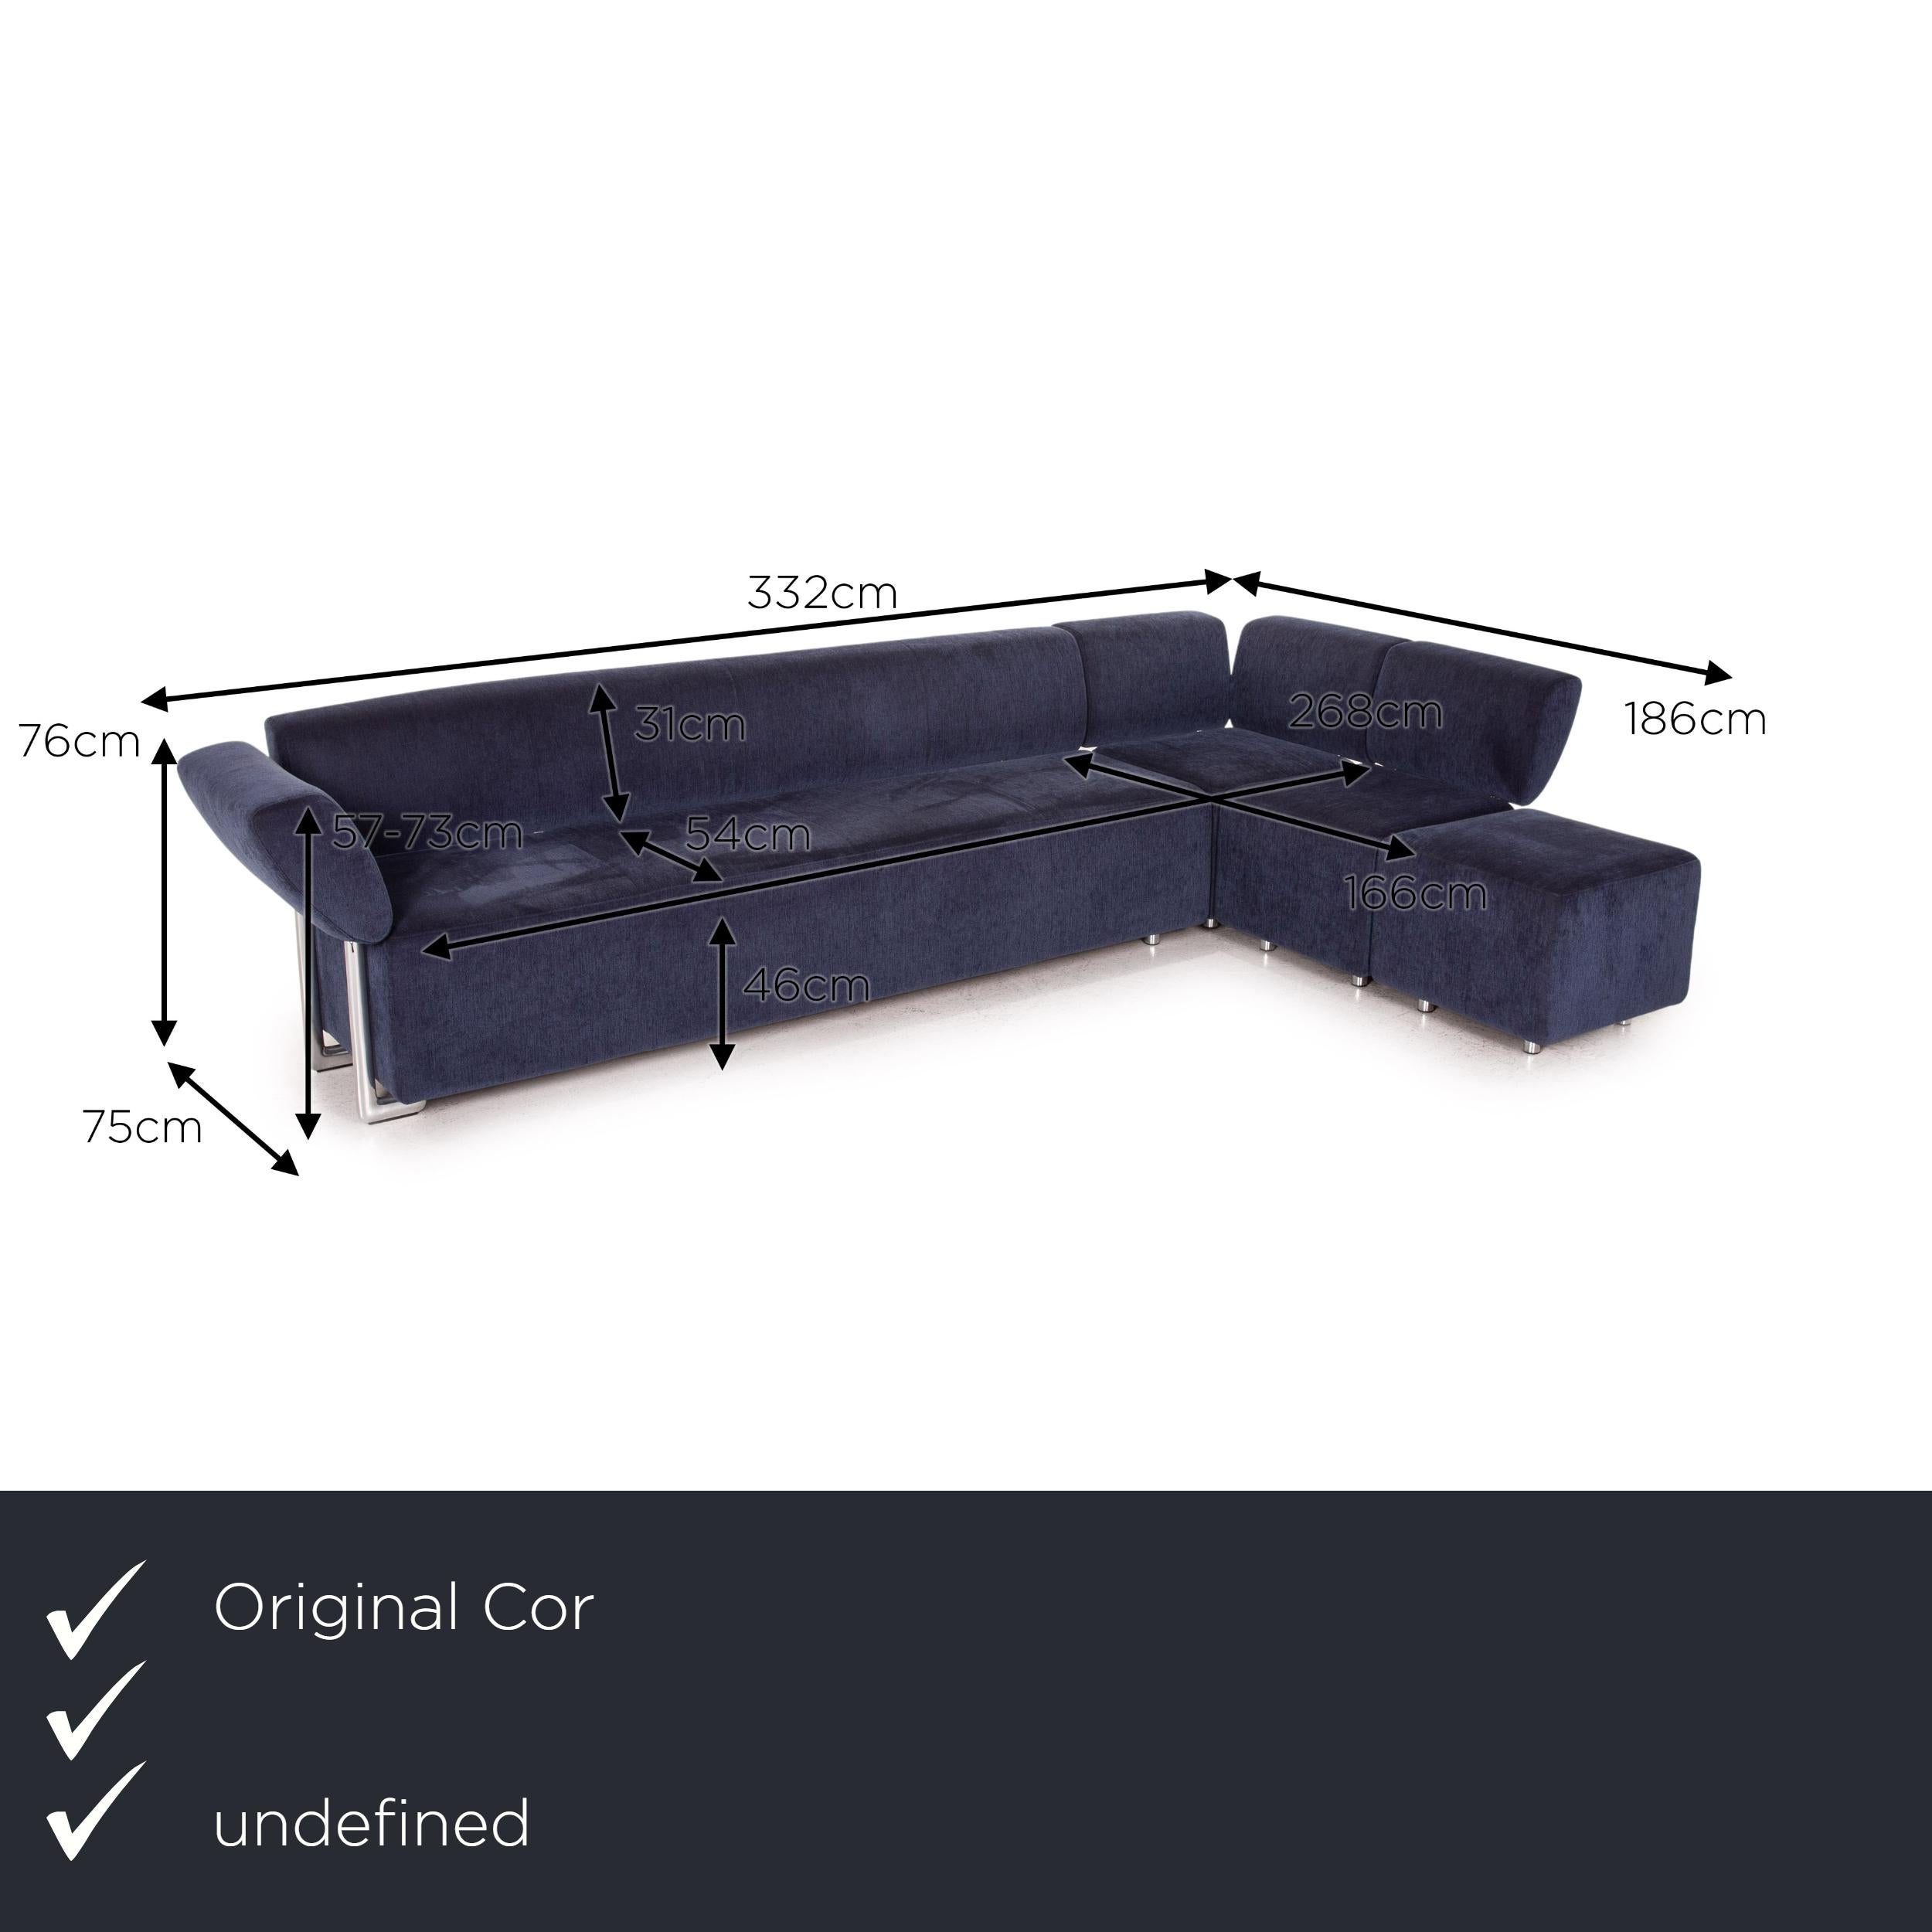 We present to you a Cor Clou fabric sofa set blue 1 corner sofa 1 armchair function.
 

 Product measurements in centimeters:
 

Depth: 75
Width: 186
Height: 76
Seat height: 46
Rest height: 57
Seat depth: 54
Seat width: 166
Back height: